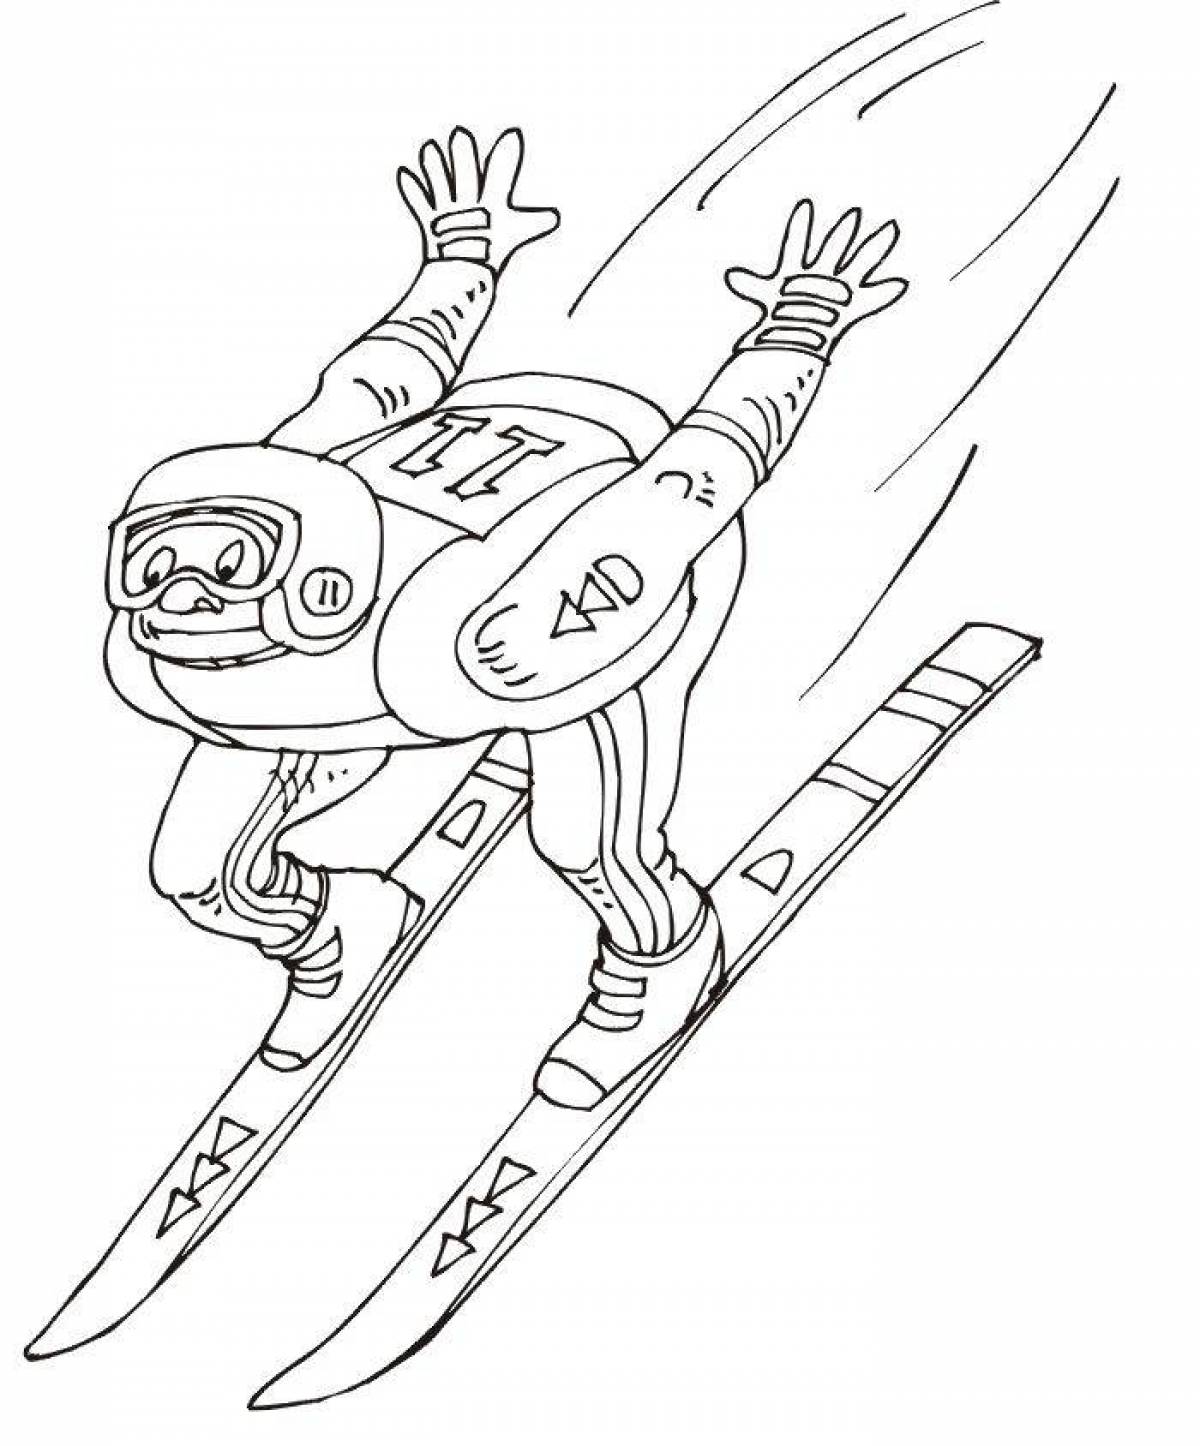 Children's winter sports coloring pages